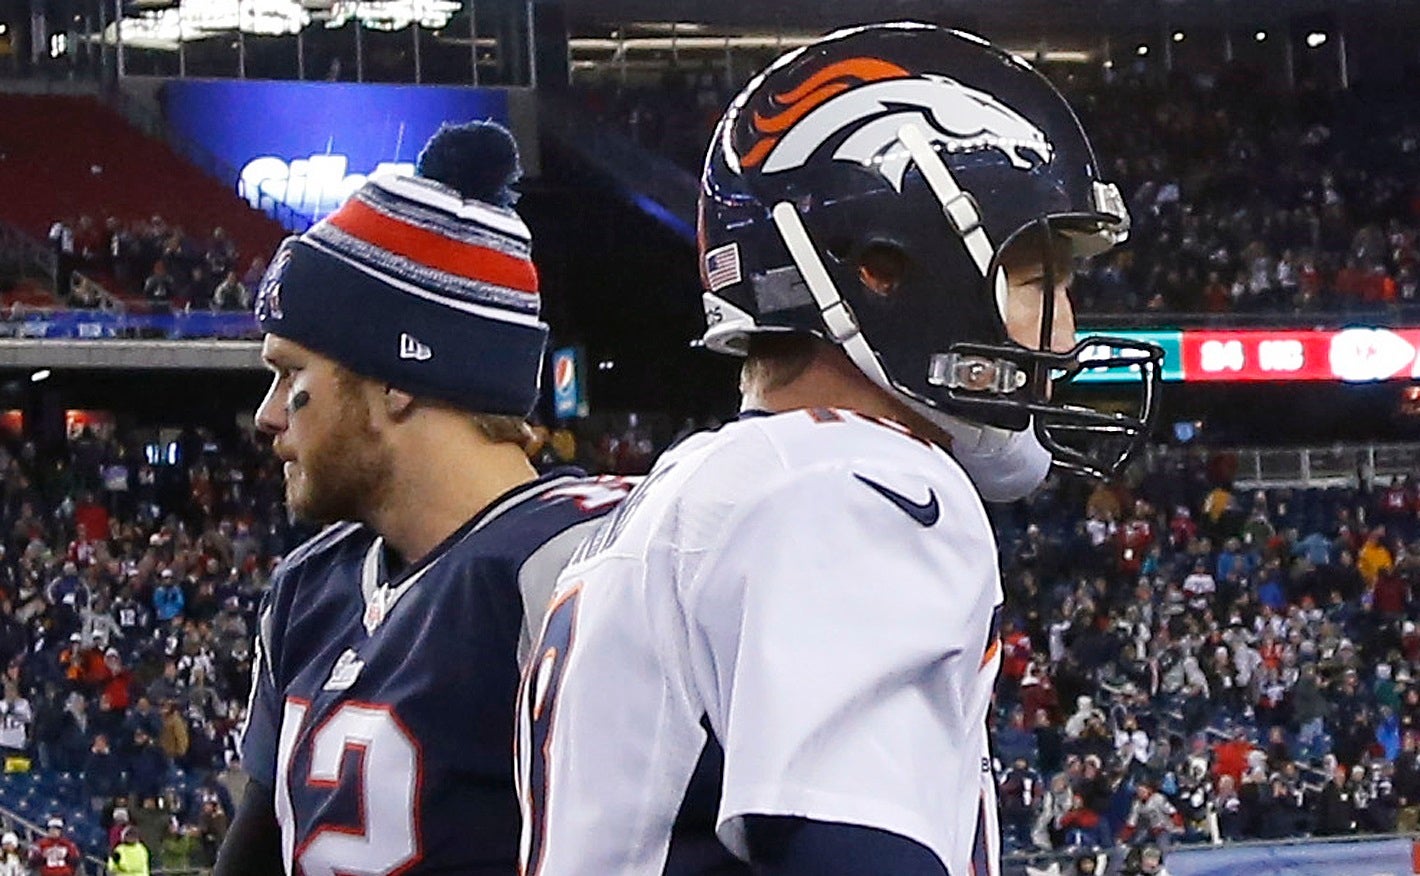 Brady, defending champs have last laugh at Manning's expense